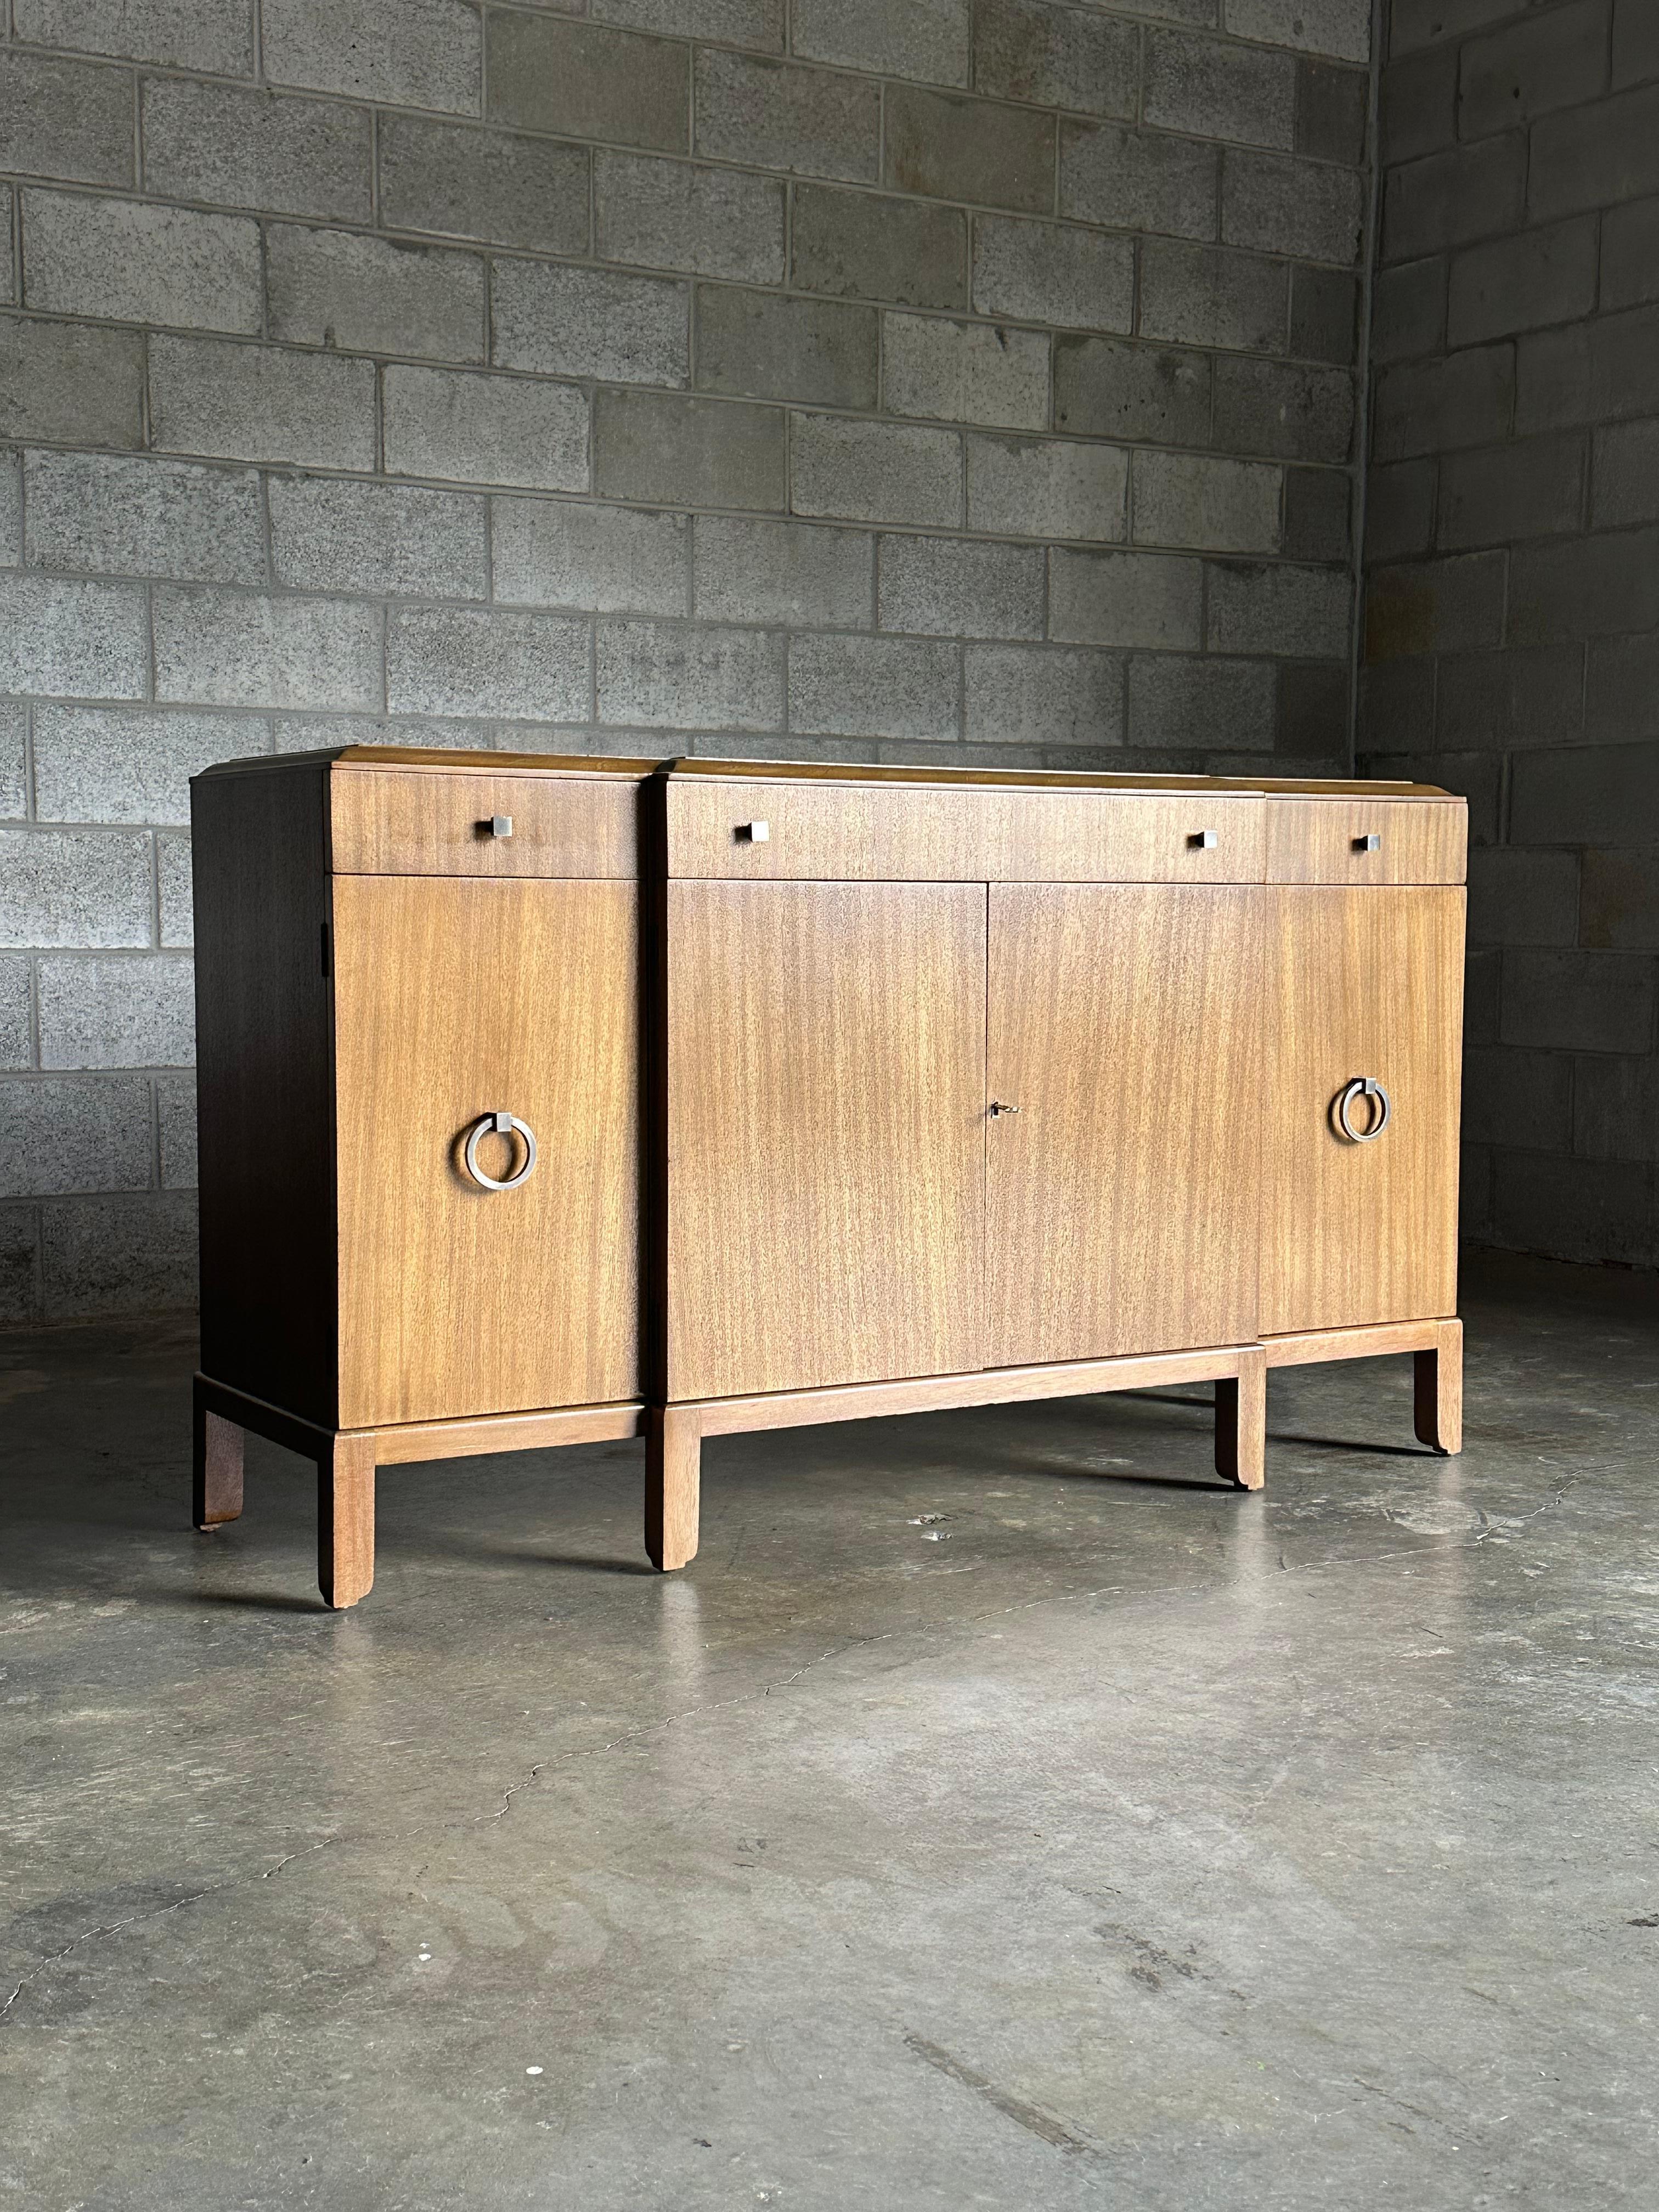 A very early (late 1930s- early 1940s) sideboard designed by Edward Wormley for Dunbar. This piece is a testament to his design philosophy of embracing new and holding onto what is true- this sideboard is no exception; it blends a traditional and